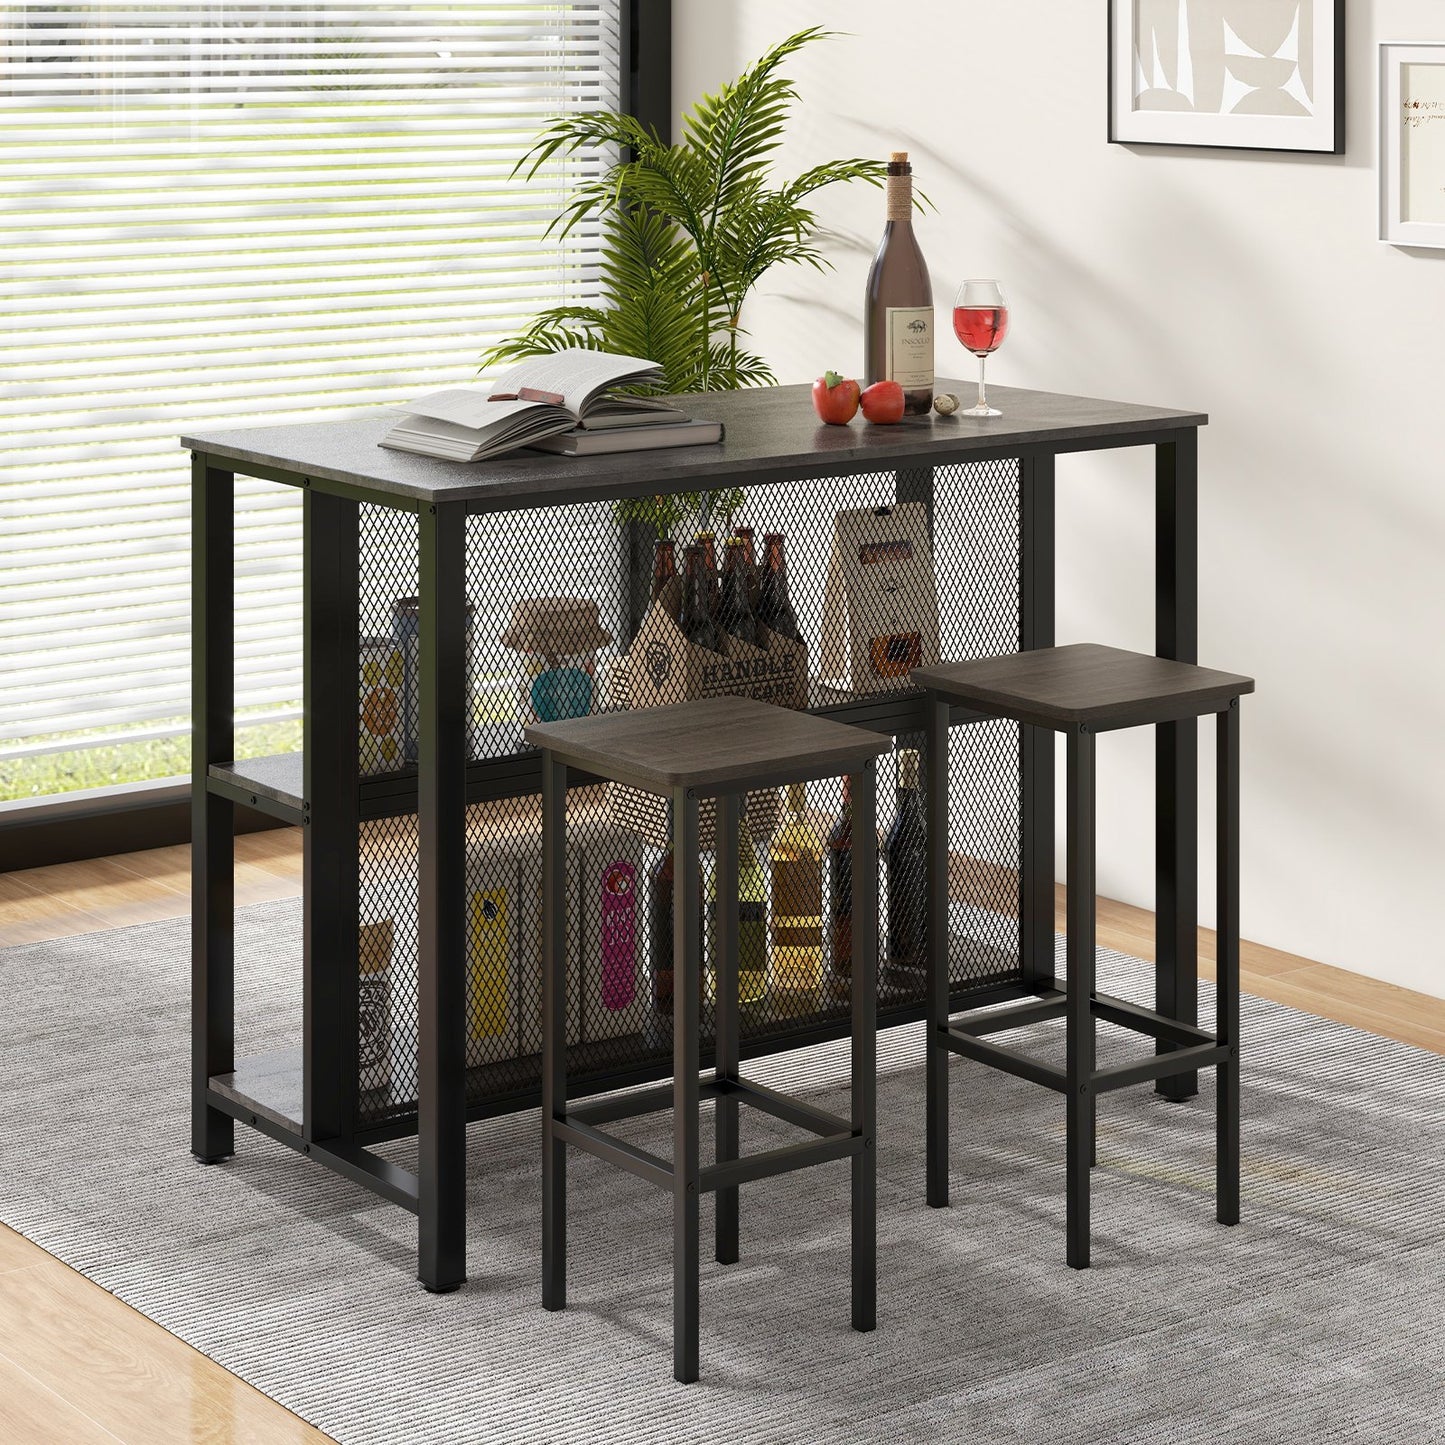 36" 3-Tier Bar Table with Storage Metal Frame Adjustable Foot Pads for Dining Room, Gray